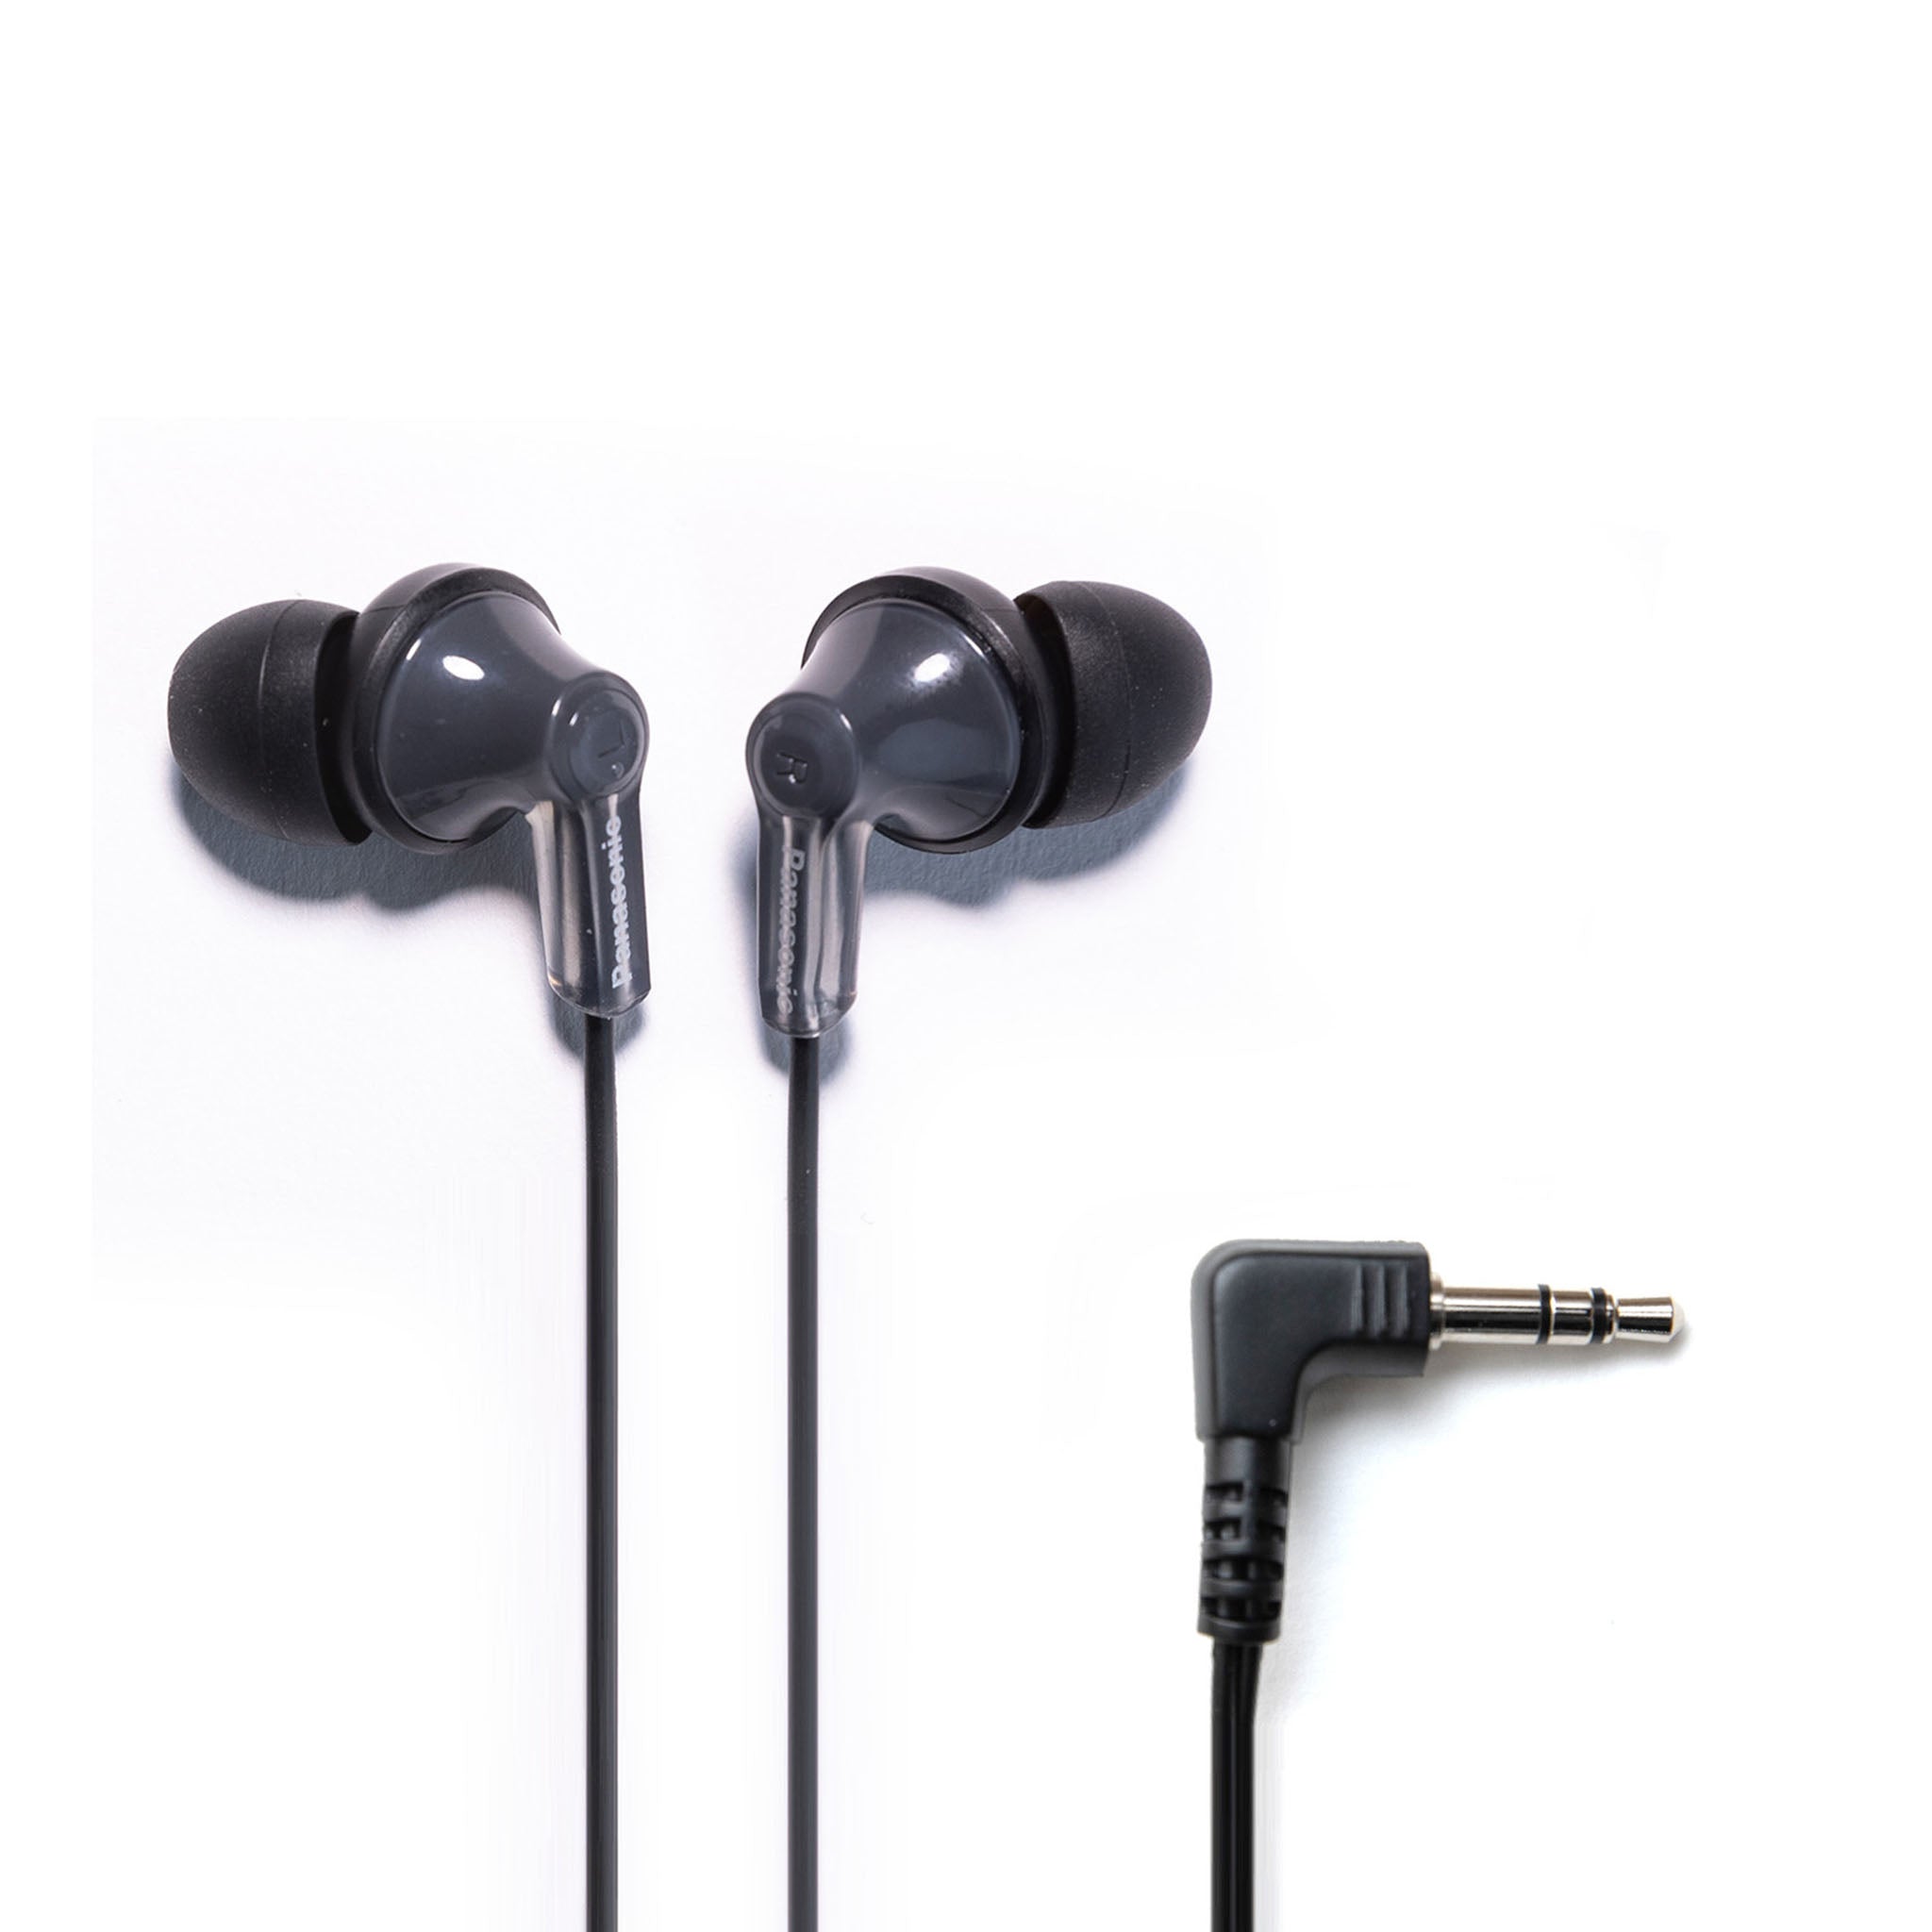 Panasonic ErgoFit In-Ear Earbud Headphones with 3.5mm Jack for Phones and  Laptops - RP-HJE120